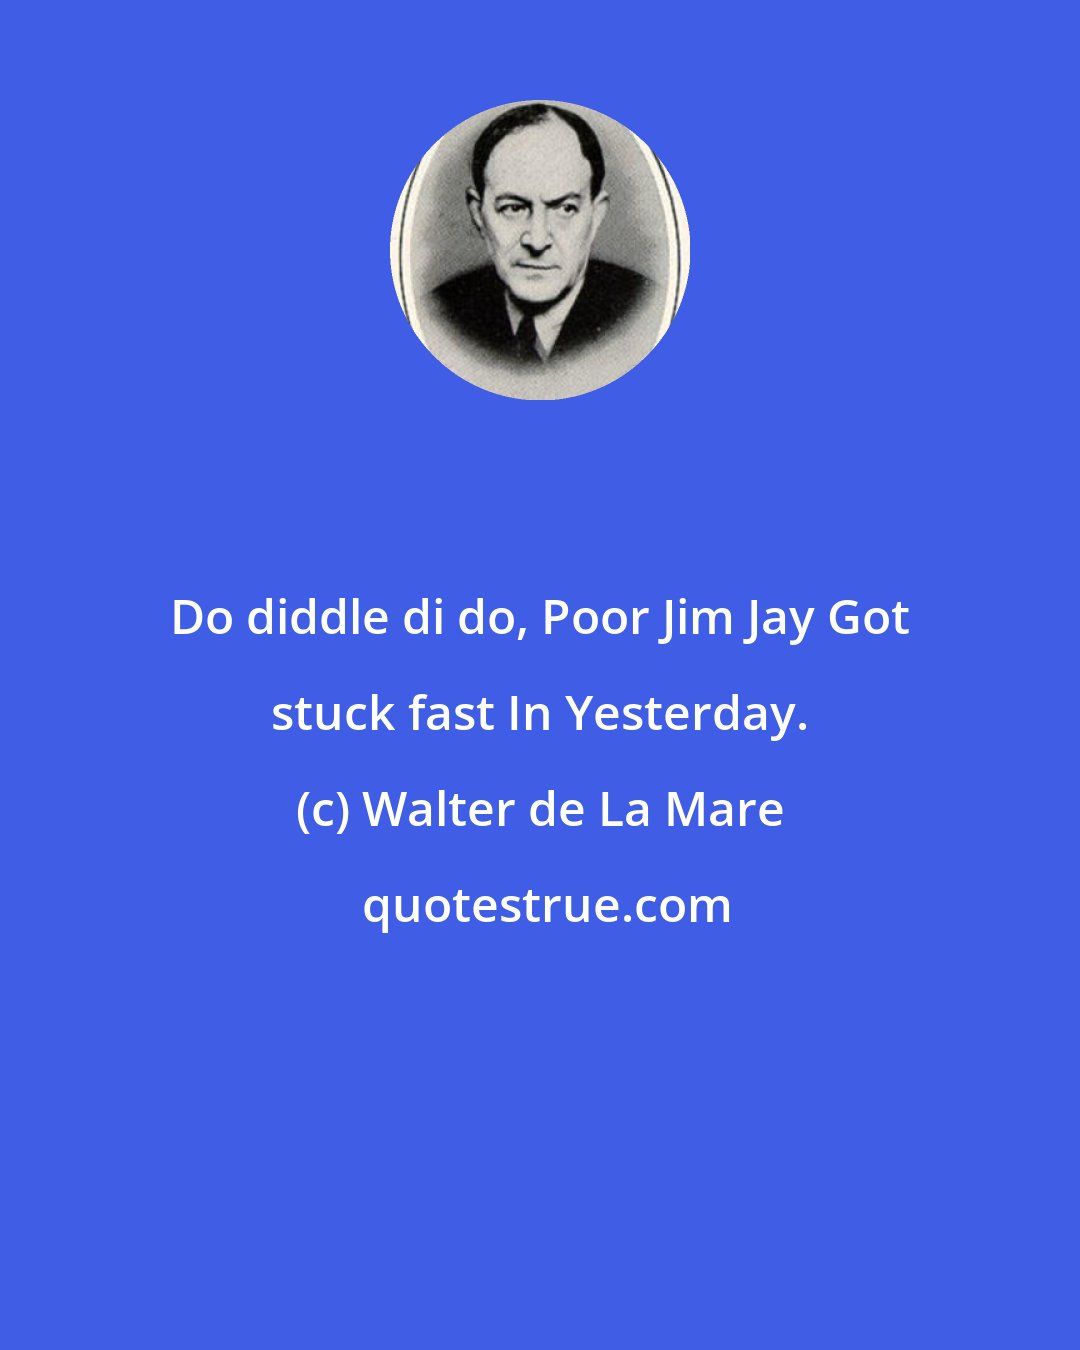 Walter de La Mare: Do diddle di do, Poor Jim Jay Got stuck fast In Yesterday.